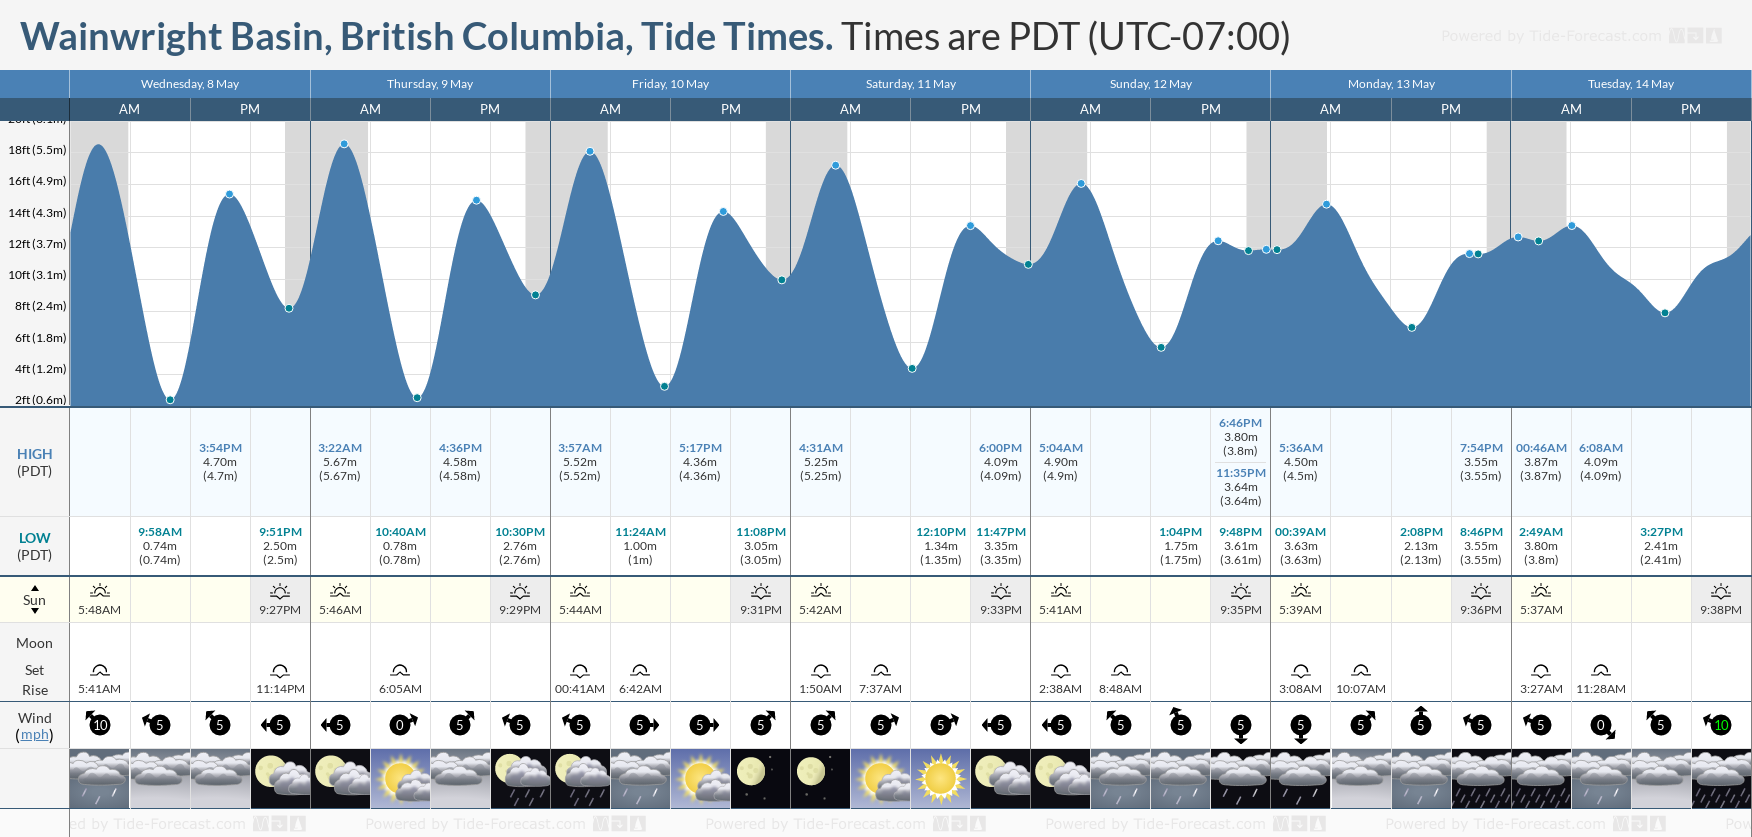 Wainwright Basin, British Columbia Tide Chart including high and low tide tide times for the next 7 days